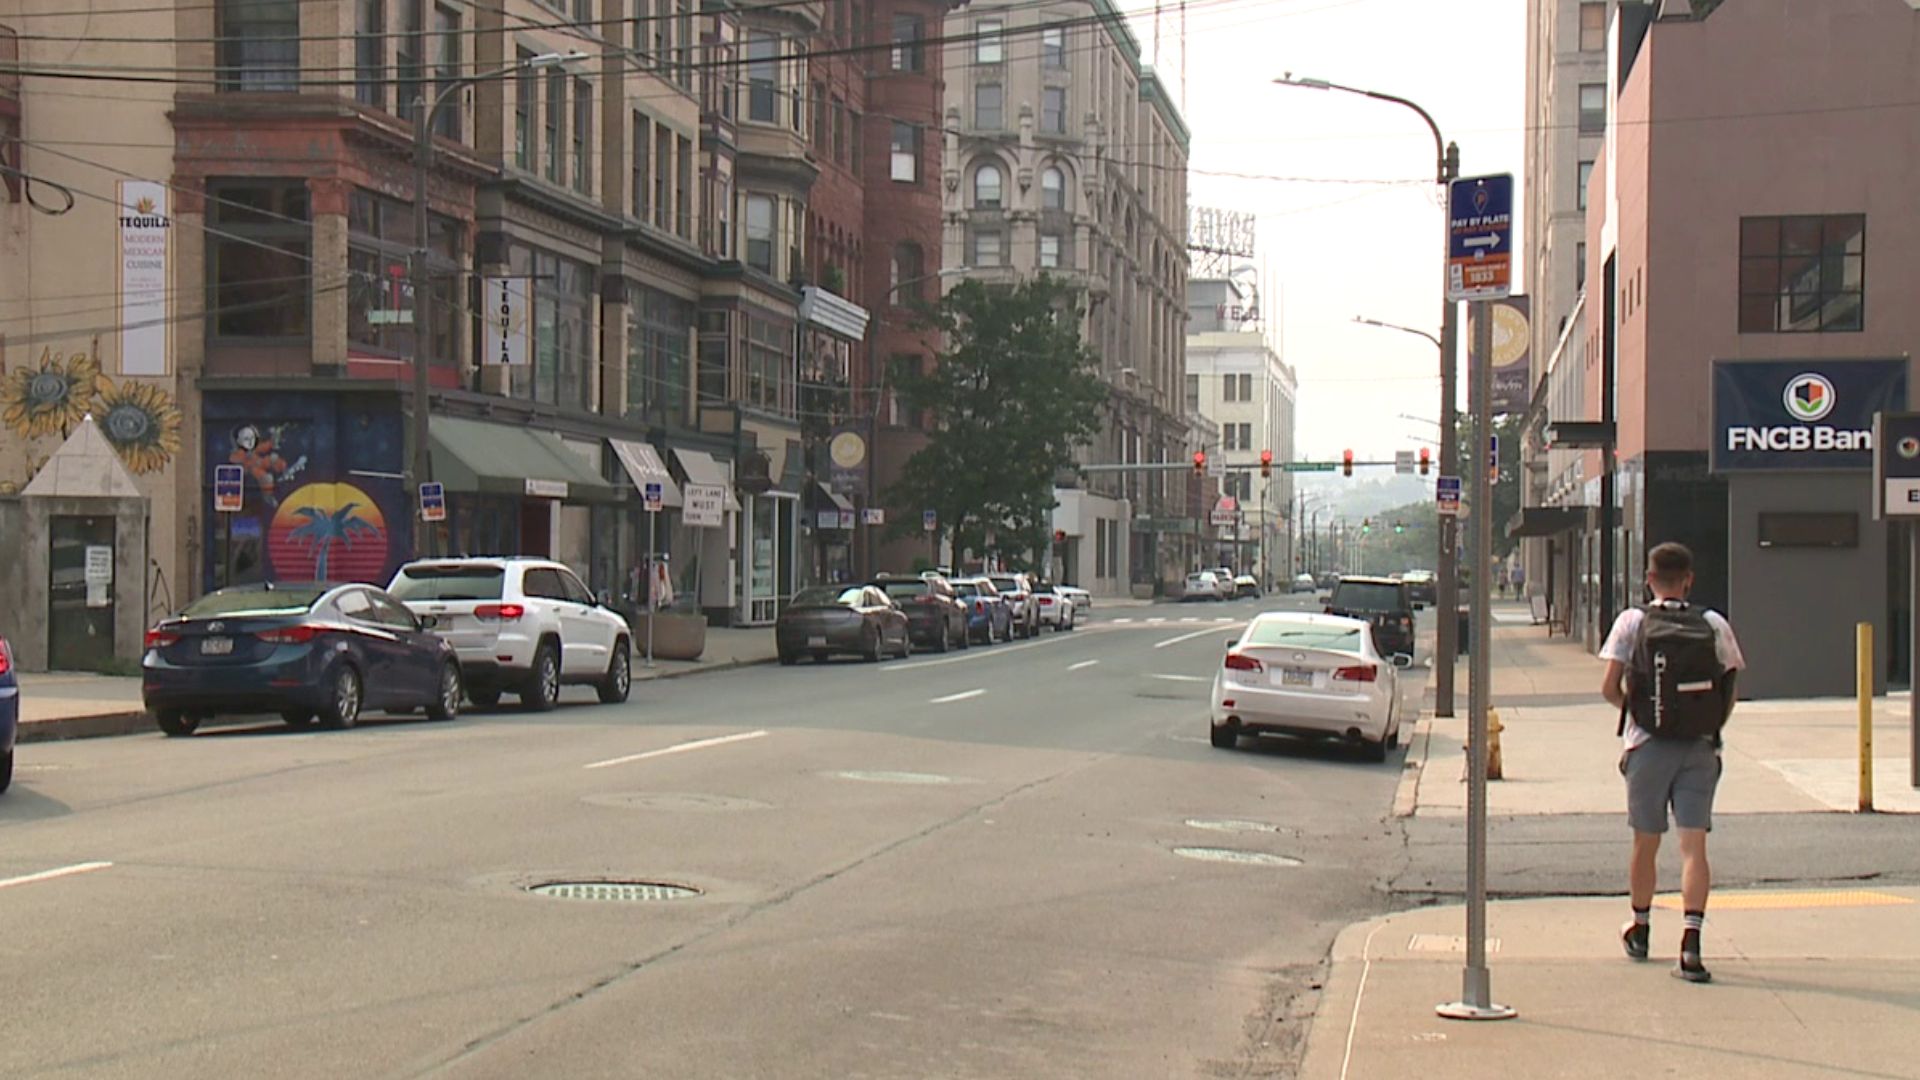 The decision comes amid pushback from downtown businesses on Spruce Street.